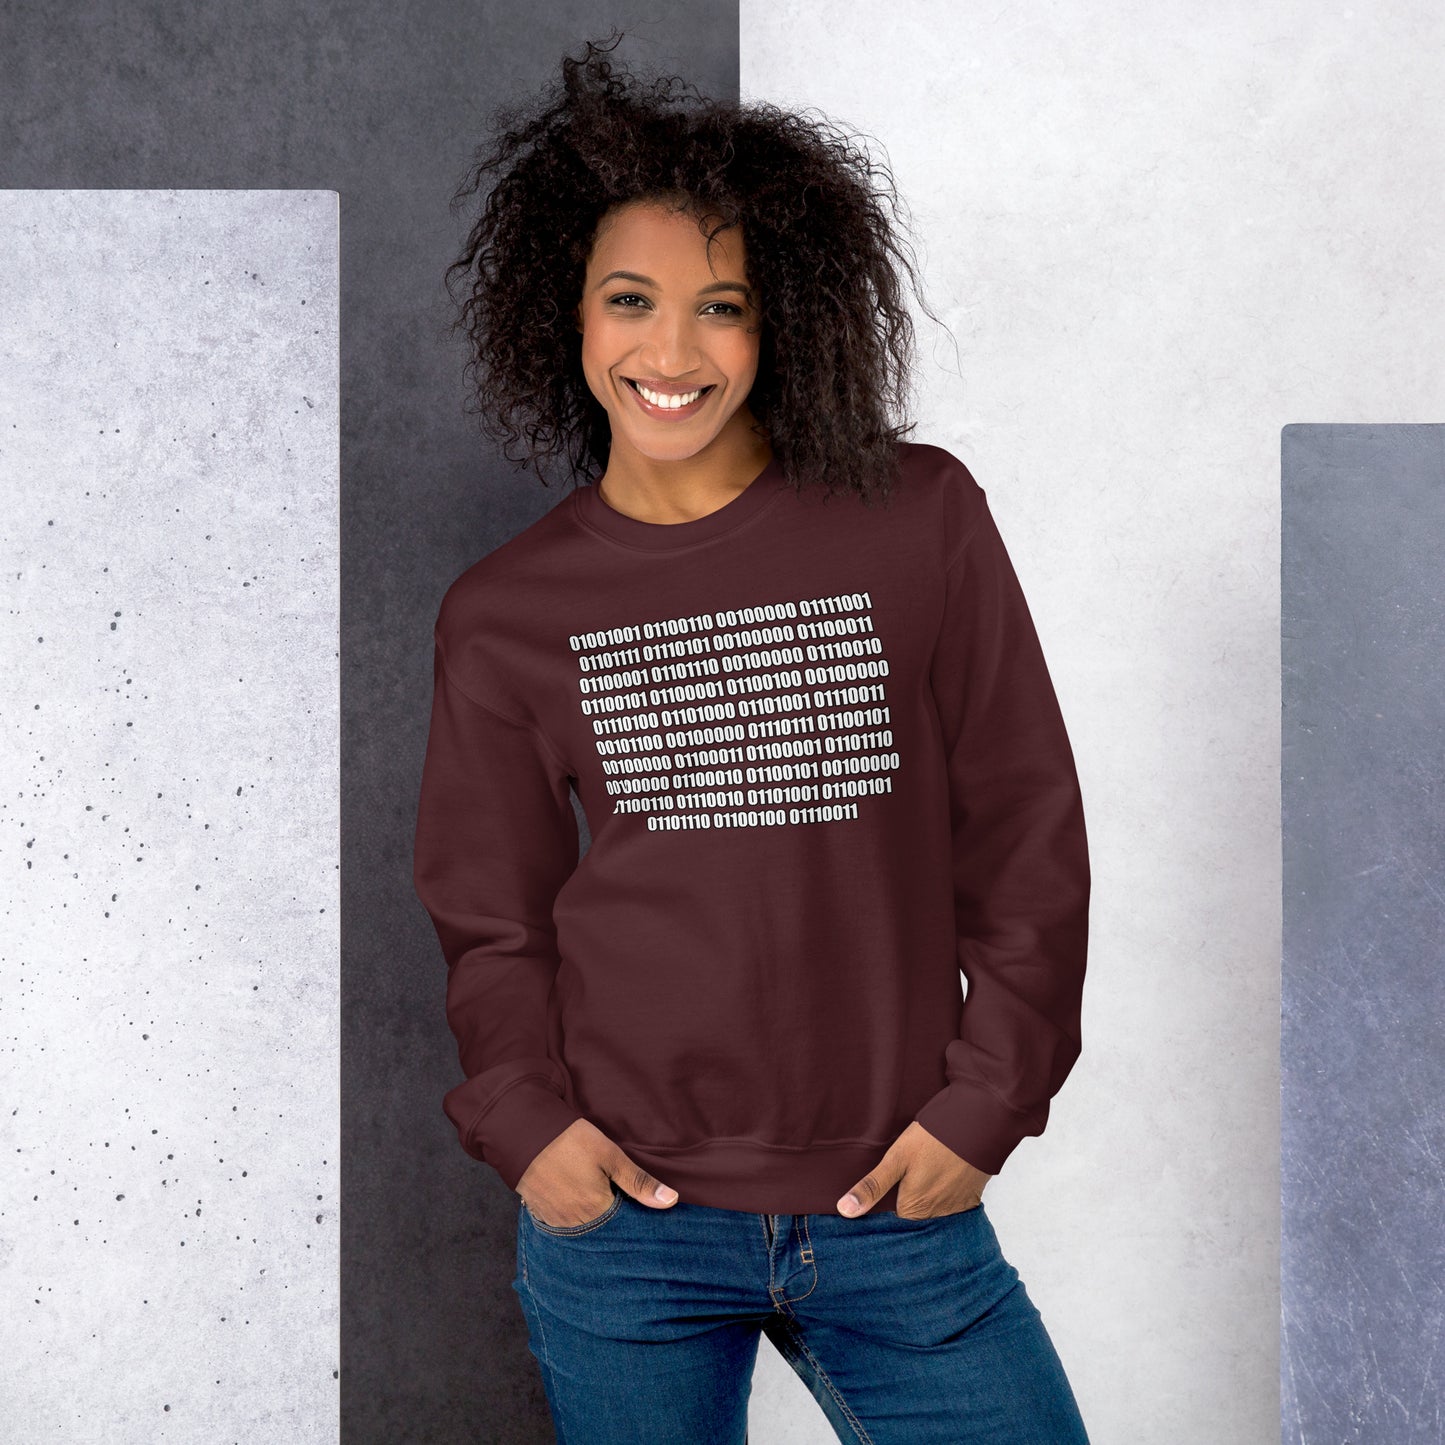 Women with maroon sweatshirt with binaire text "If you can read this"